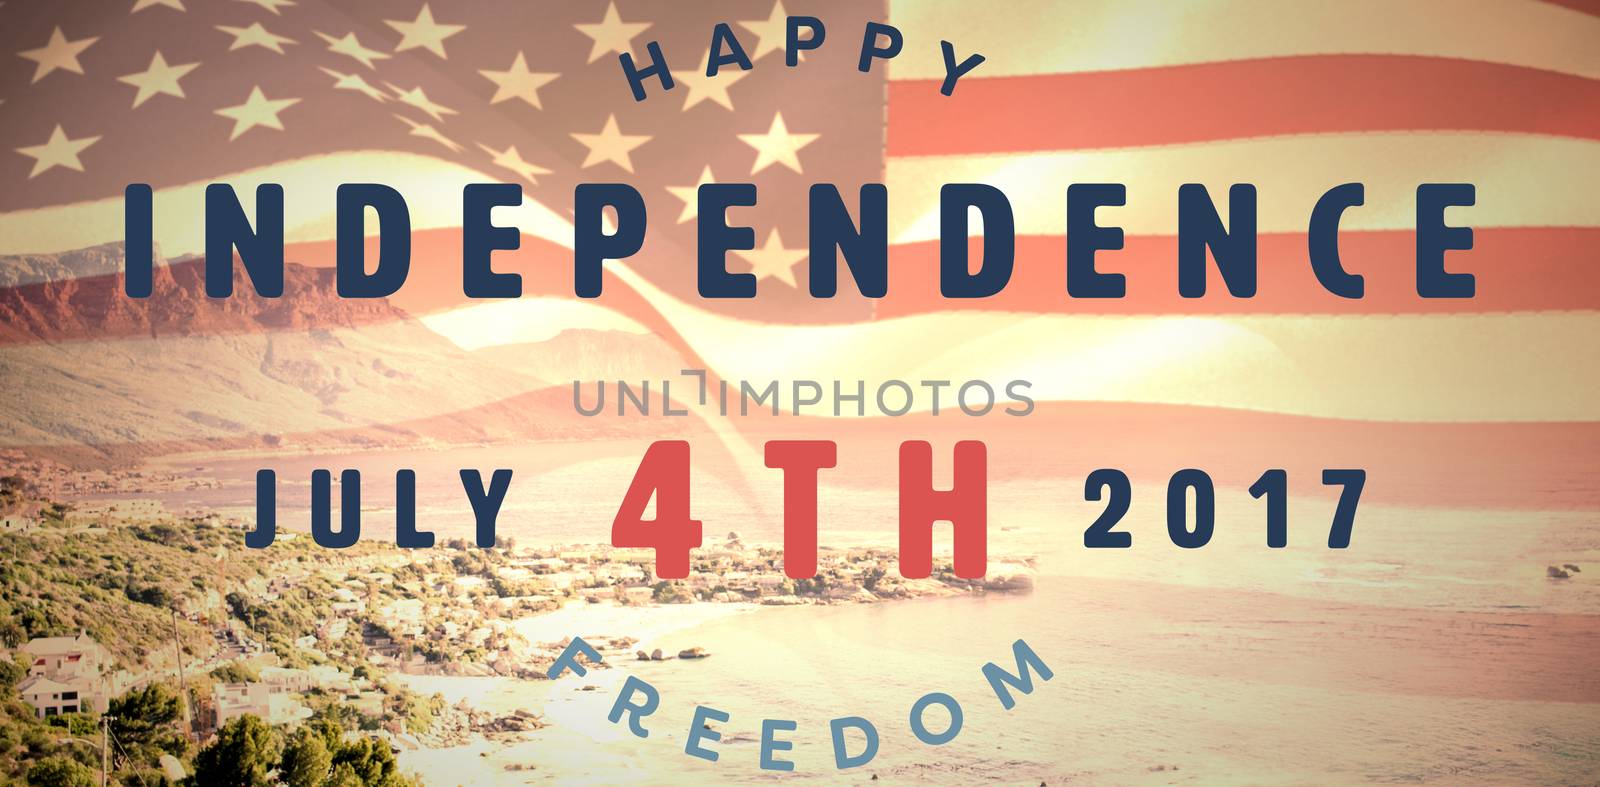 Composite image of computer graphic image of happy 4th of july text by Wavebreakmedia